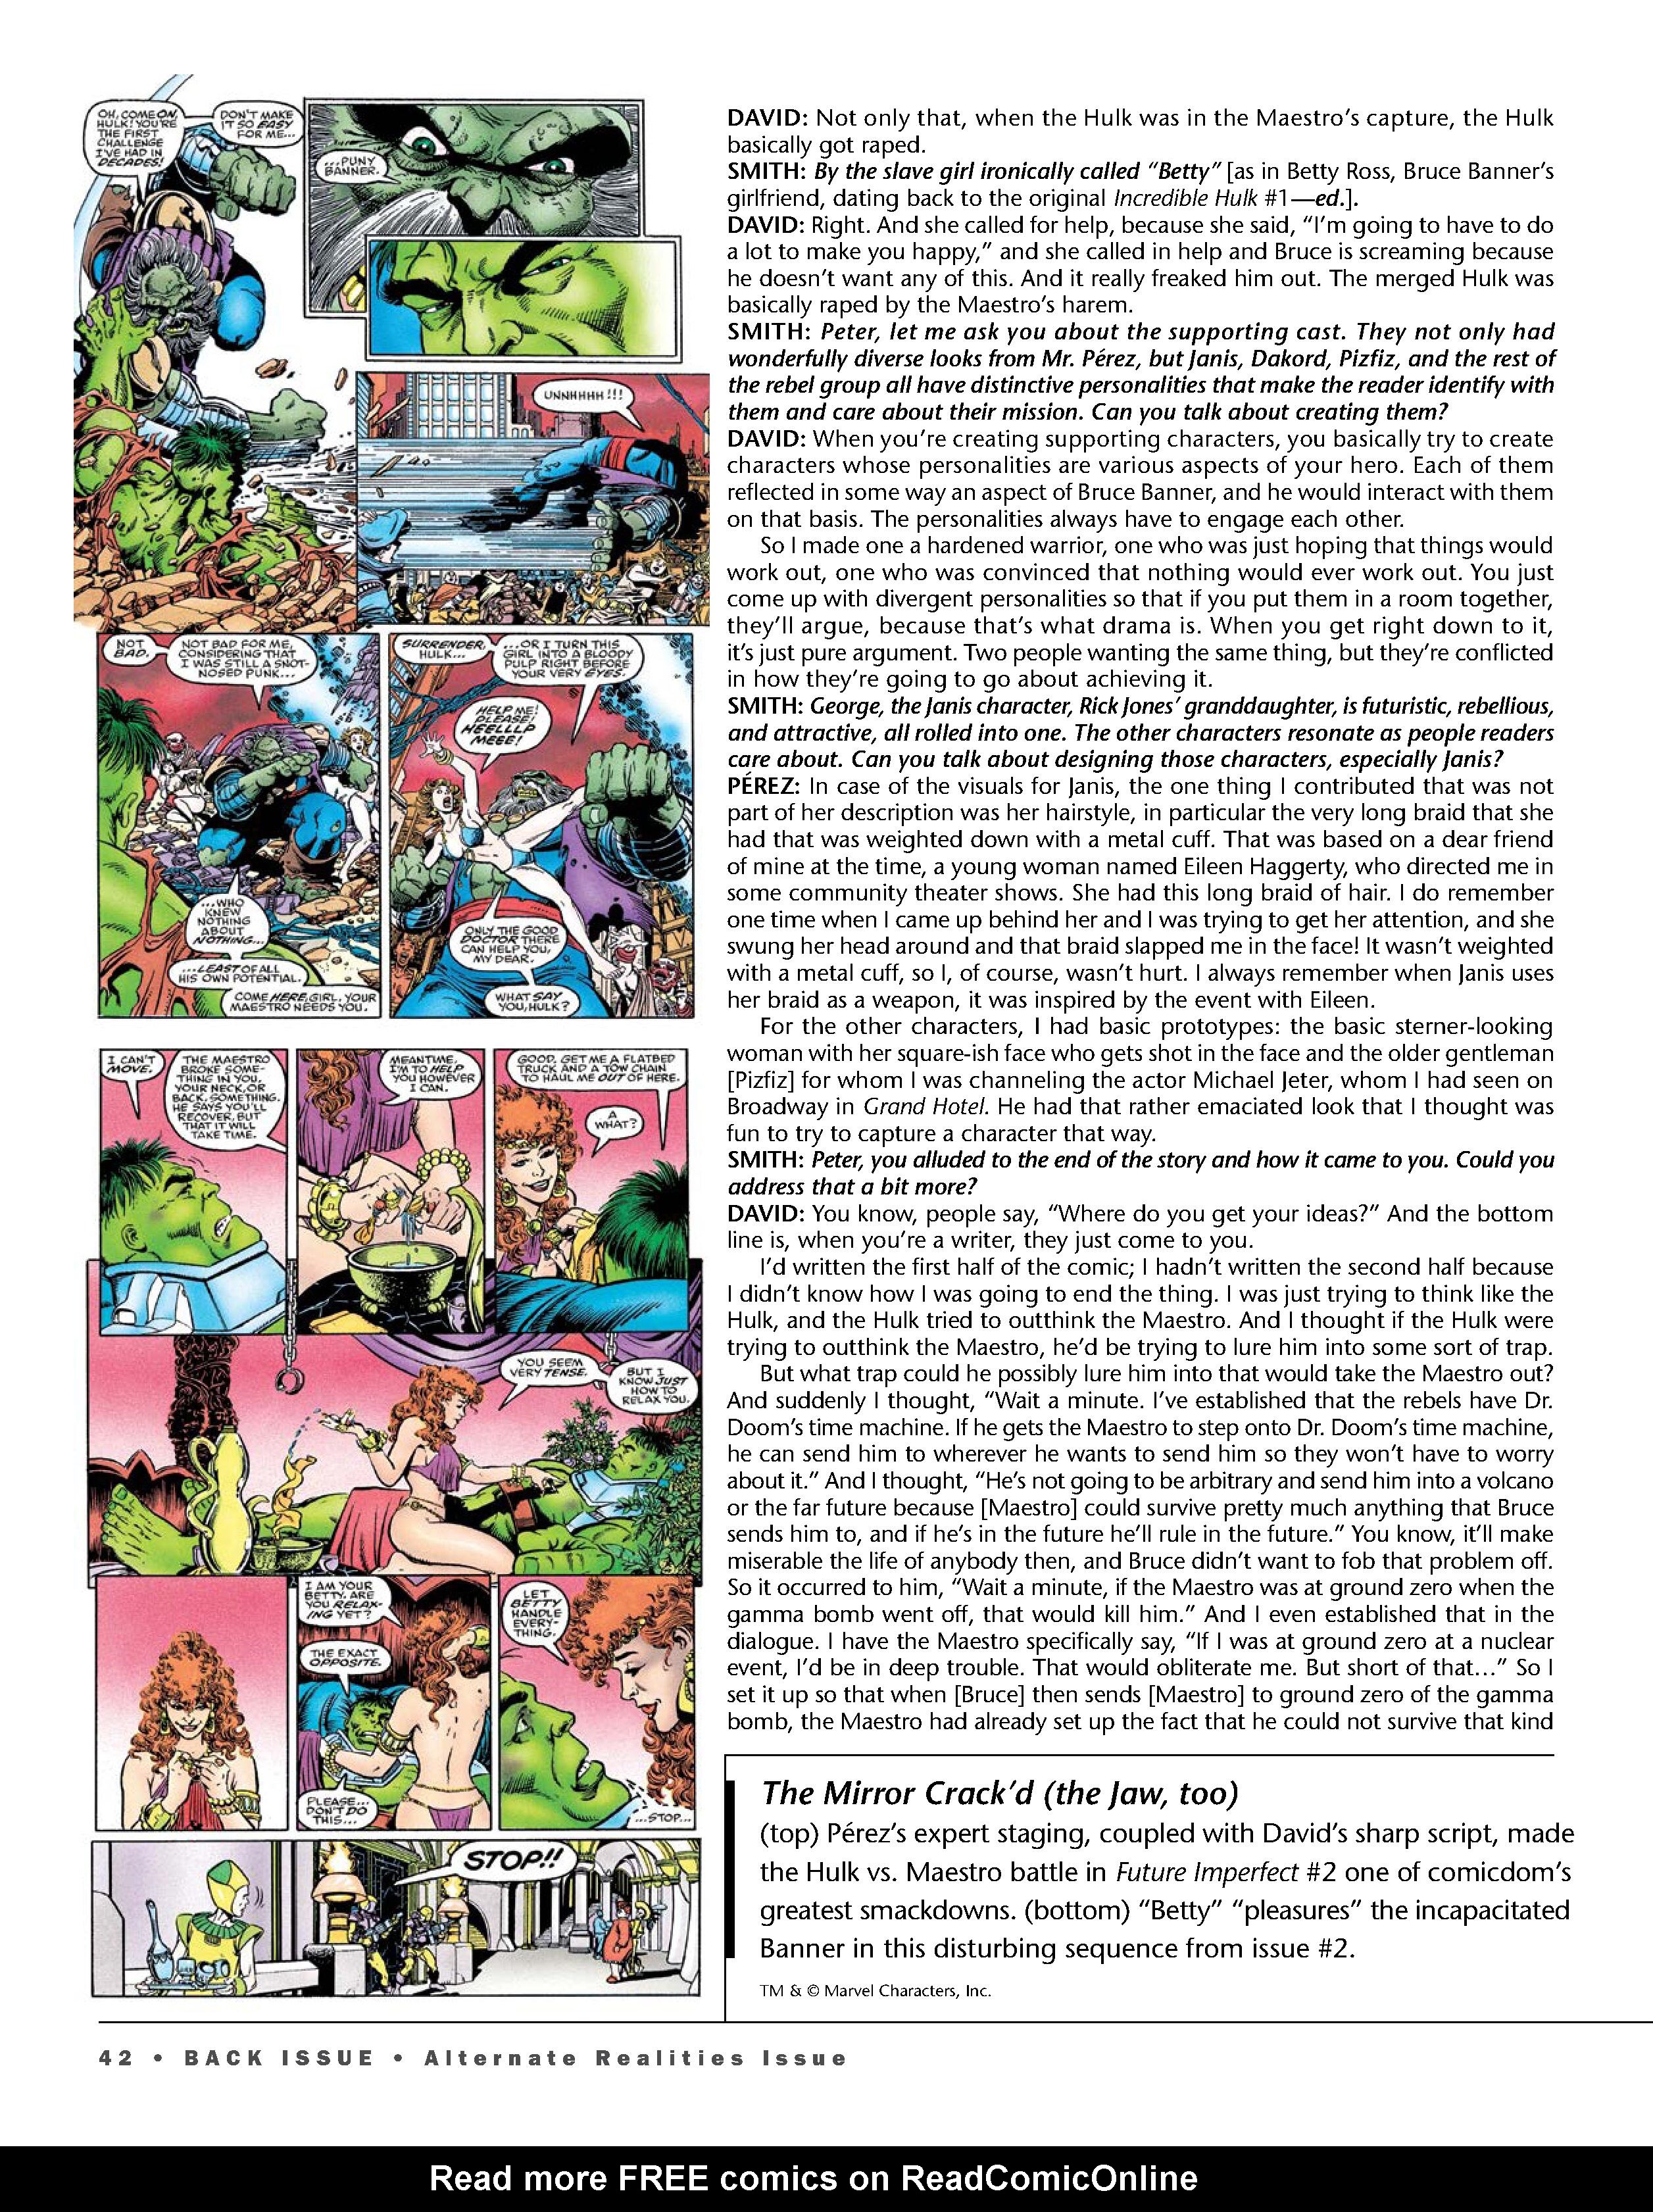 Read online Back Issue comic -  Issue #111 - 44